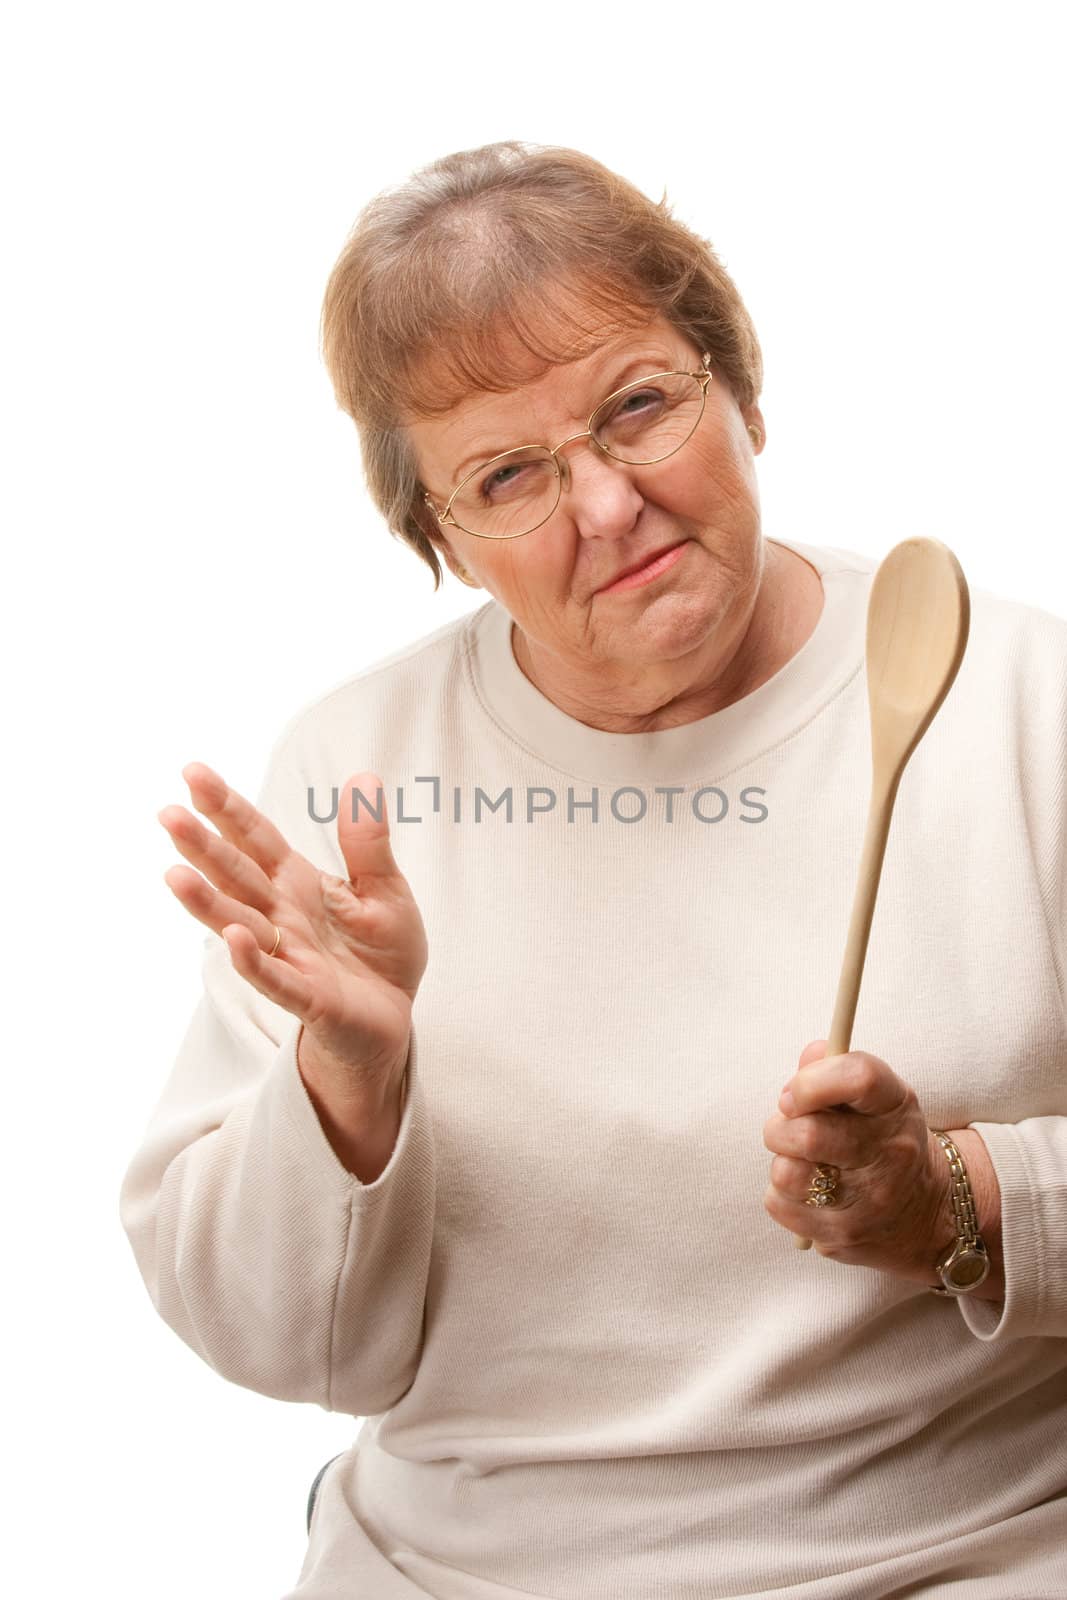 Upset Senior Woman with The Wooden Spoon Isolated on a White Background.